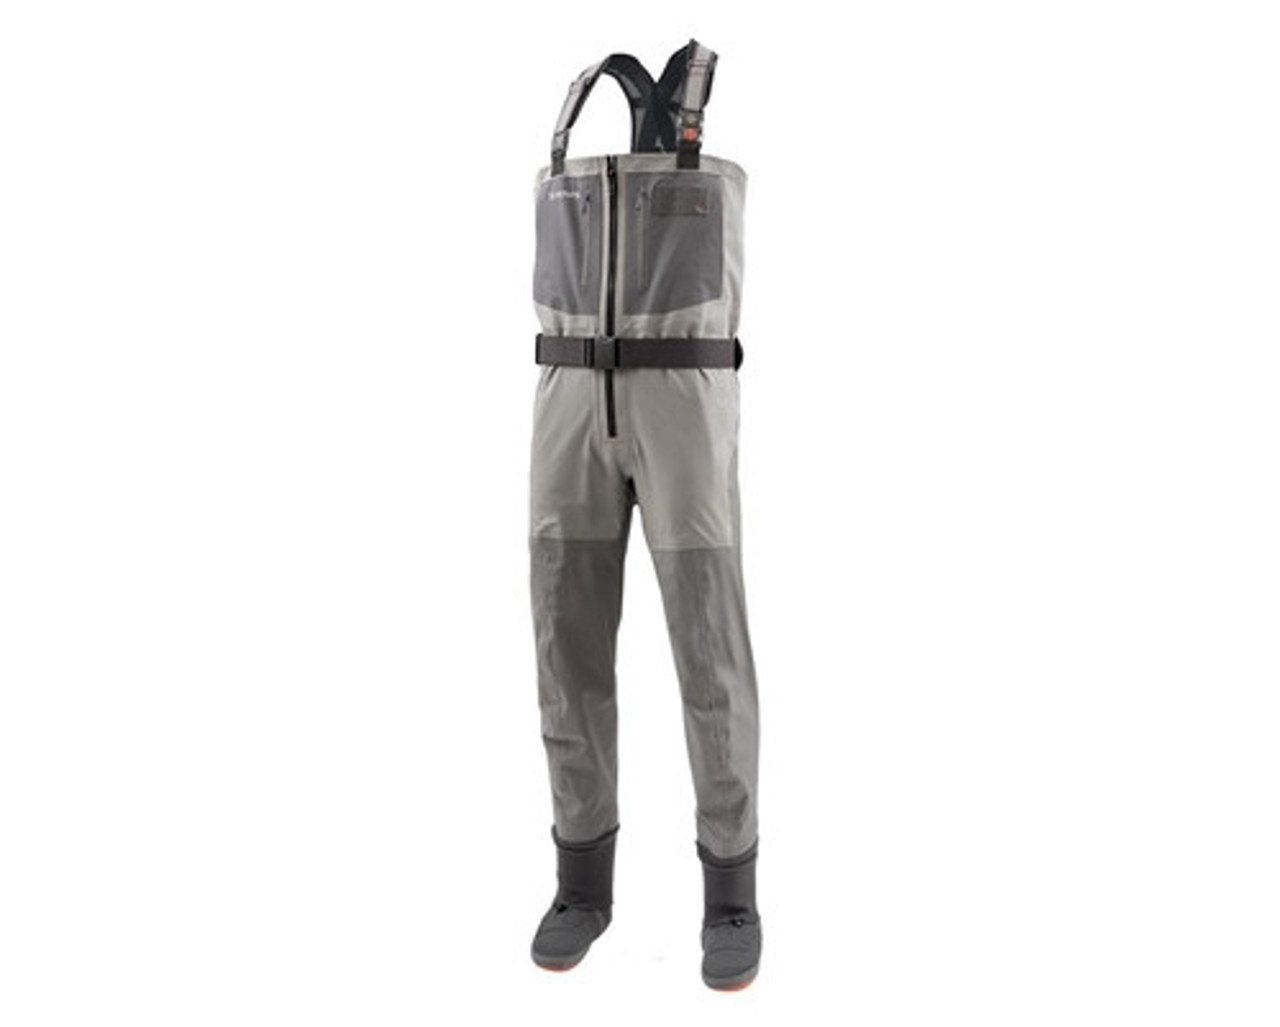 Simms G4Z Gore-Tex Wader Closeout Sale